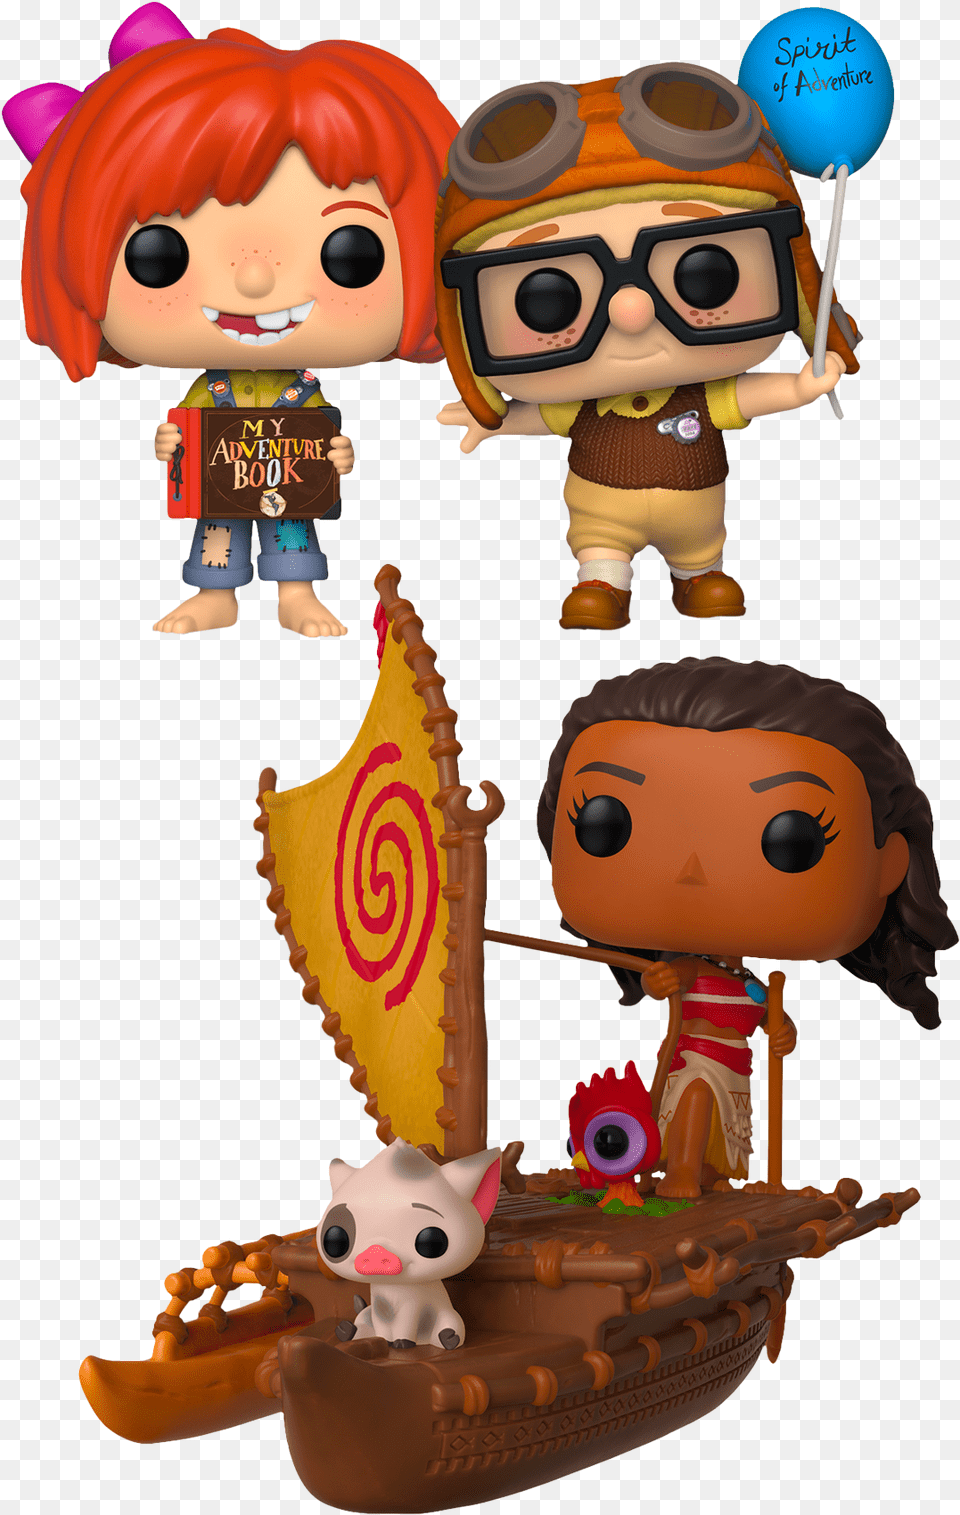 Young Carl Amp Ellie With Moana Funko Pop Vinyl Figure, Baby, Person, Face, Head Png